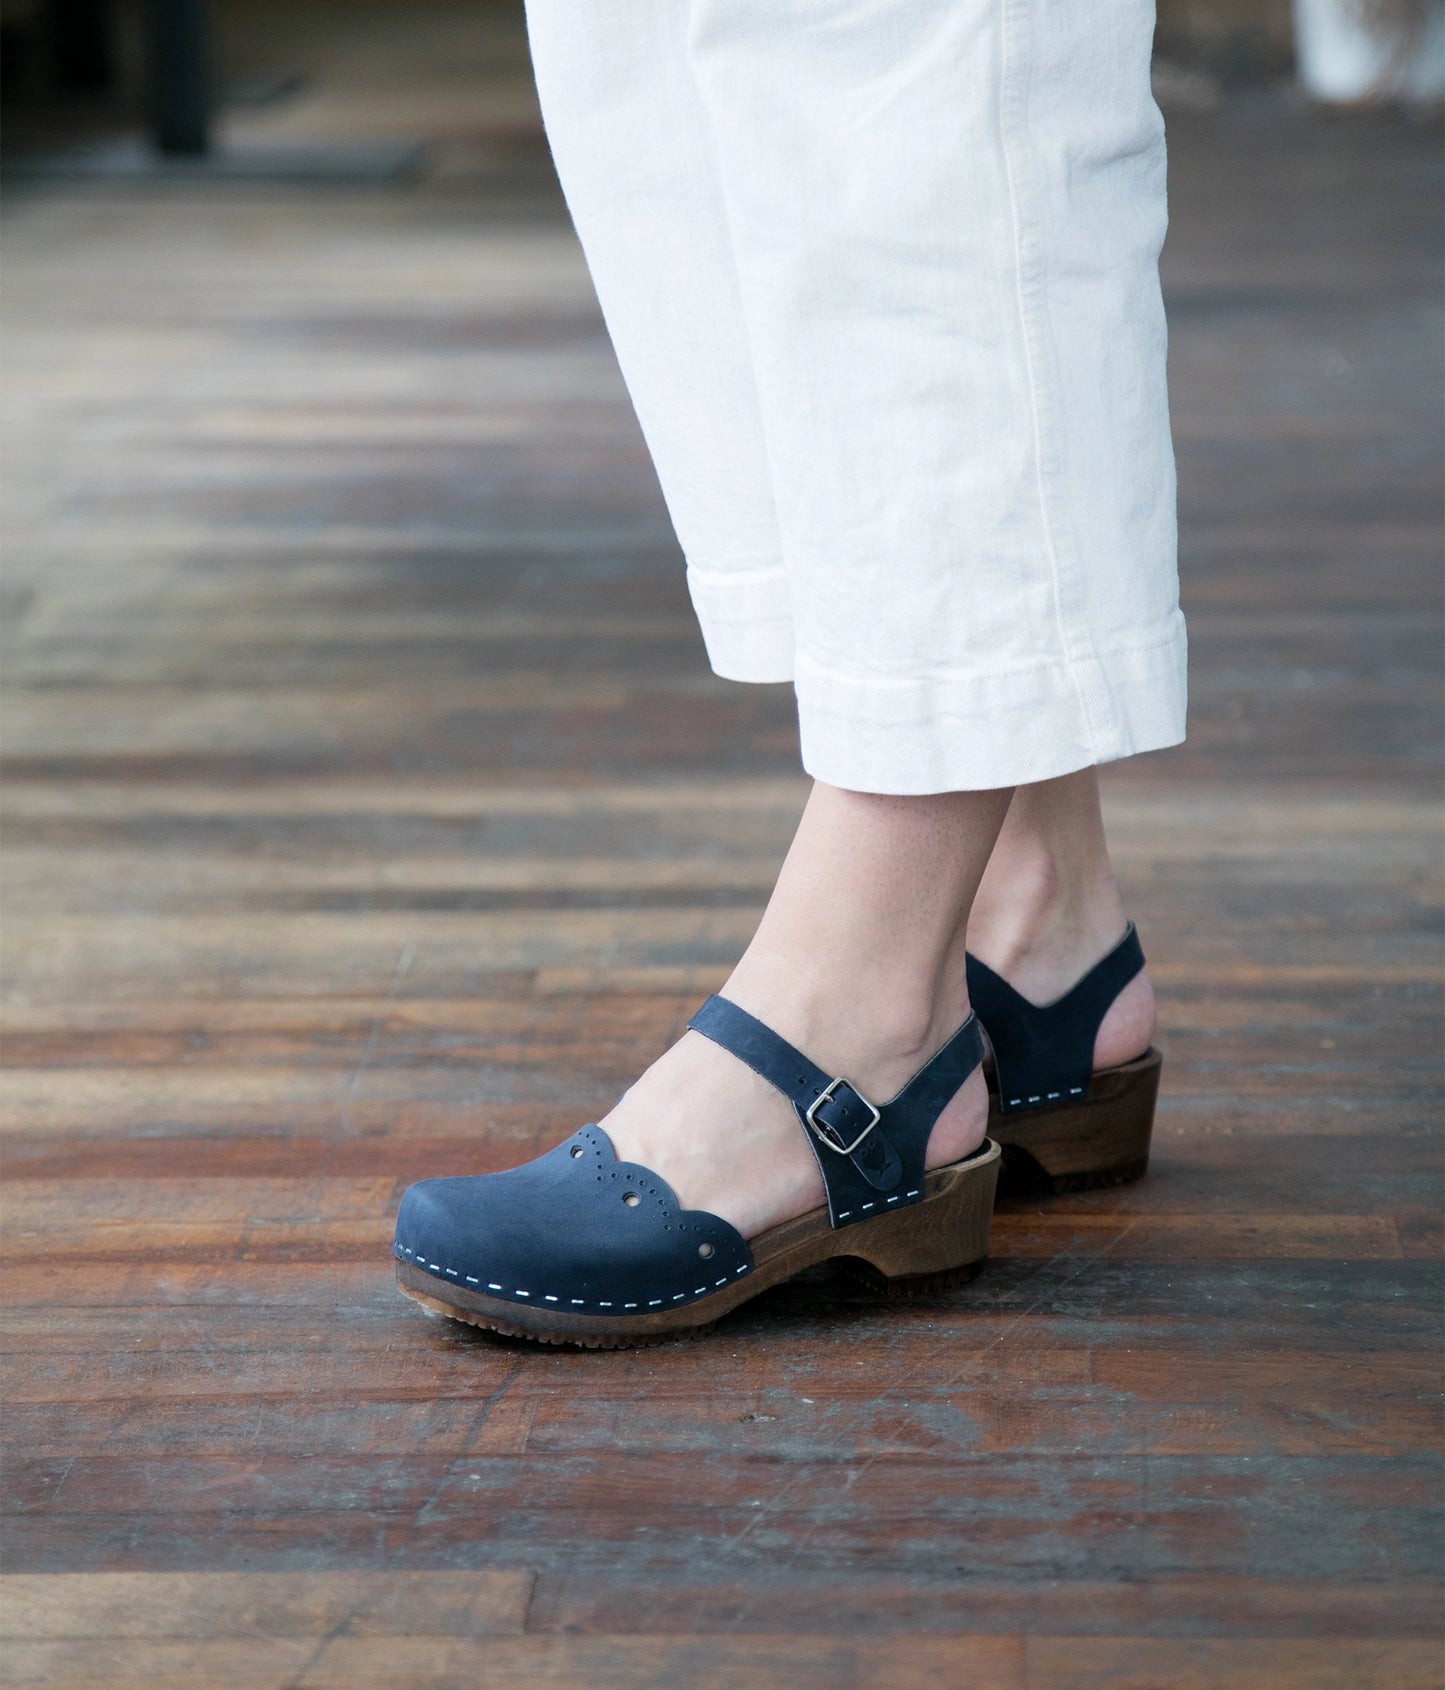 low heeled closed-toe clog sandals in navy blue nubuck leather with a wavy leather cutout stapled on a dark wooden base